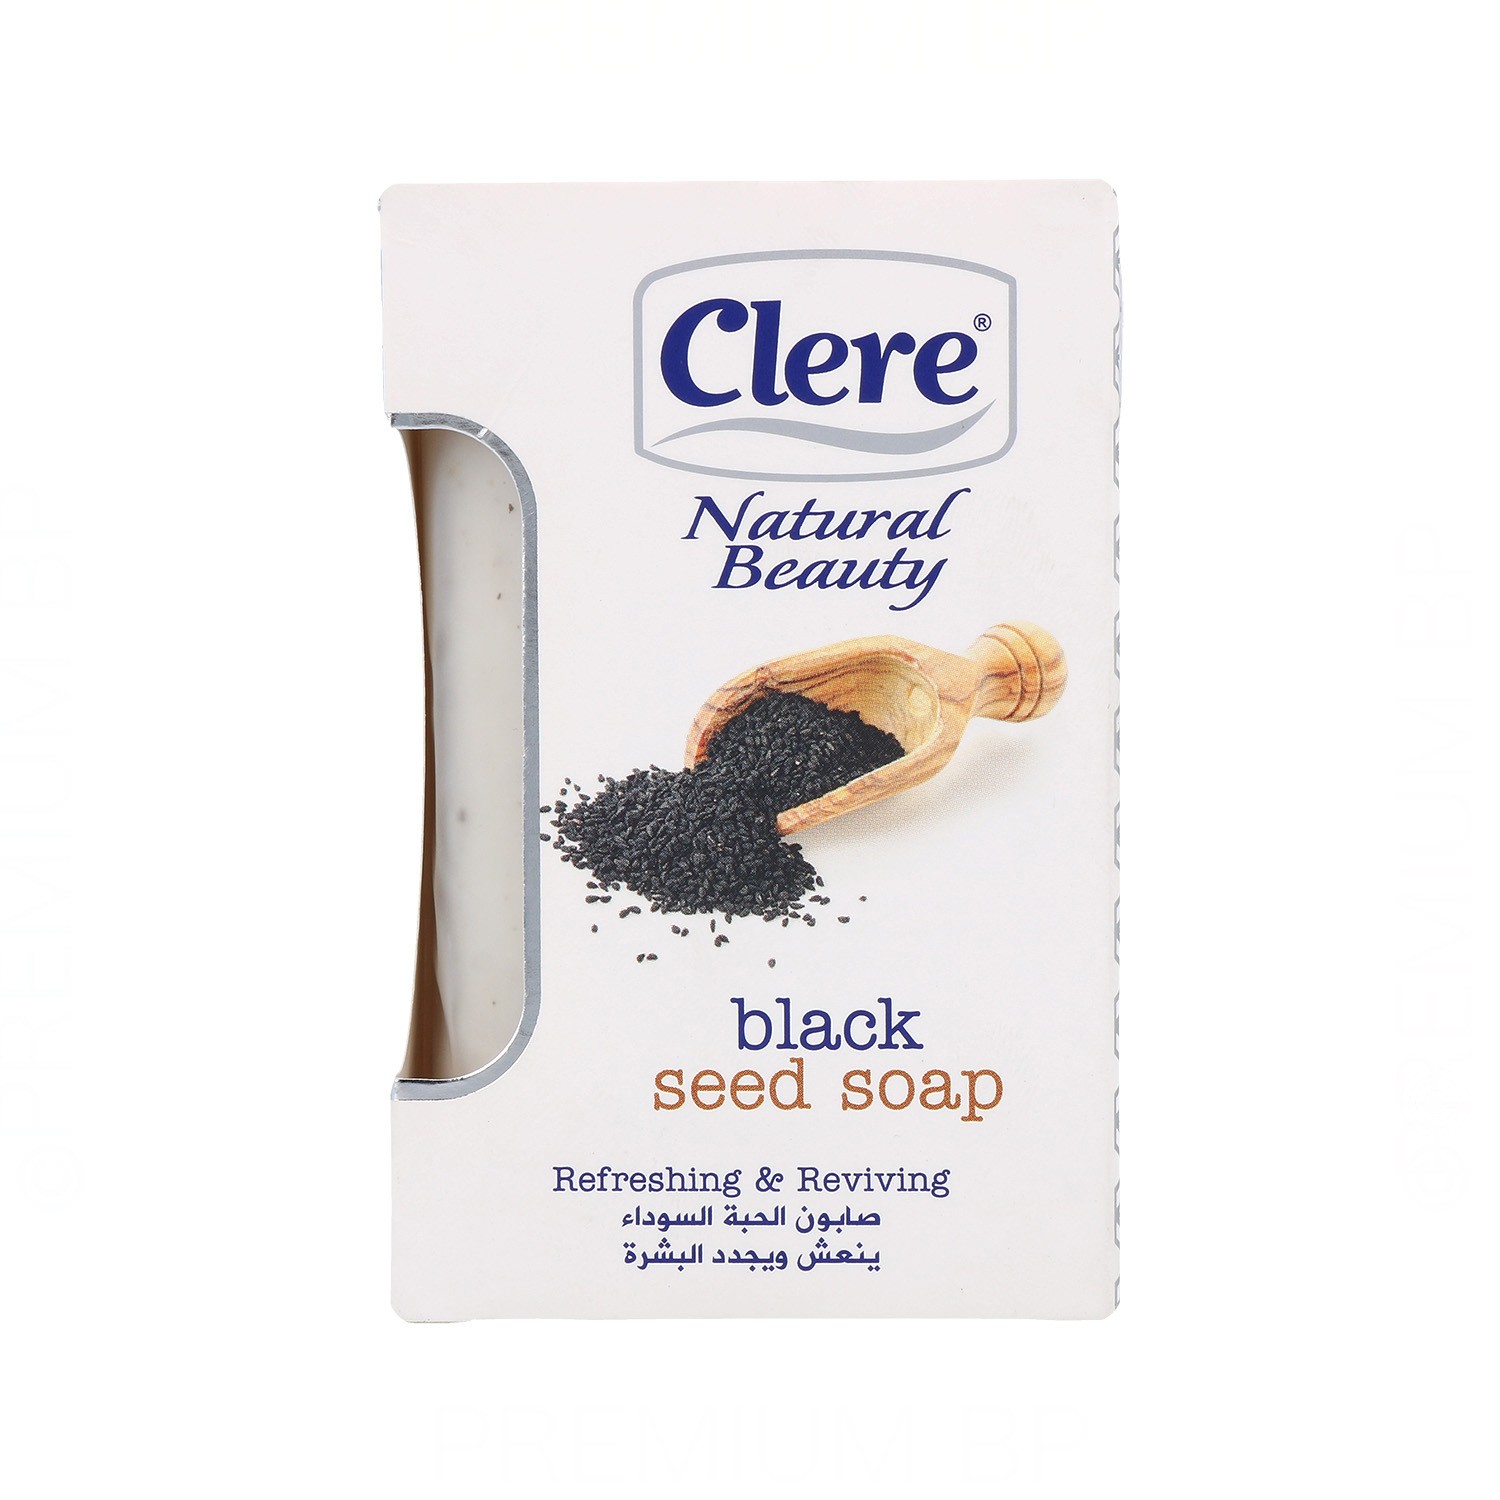 Clere Natural Beauty Soap Black Seed 150G (Nbc503)